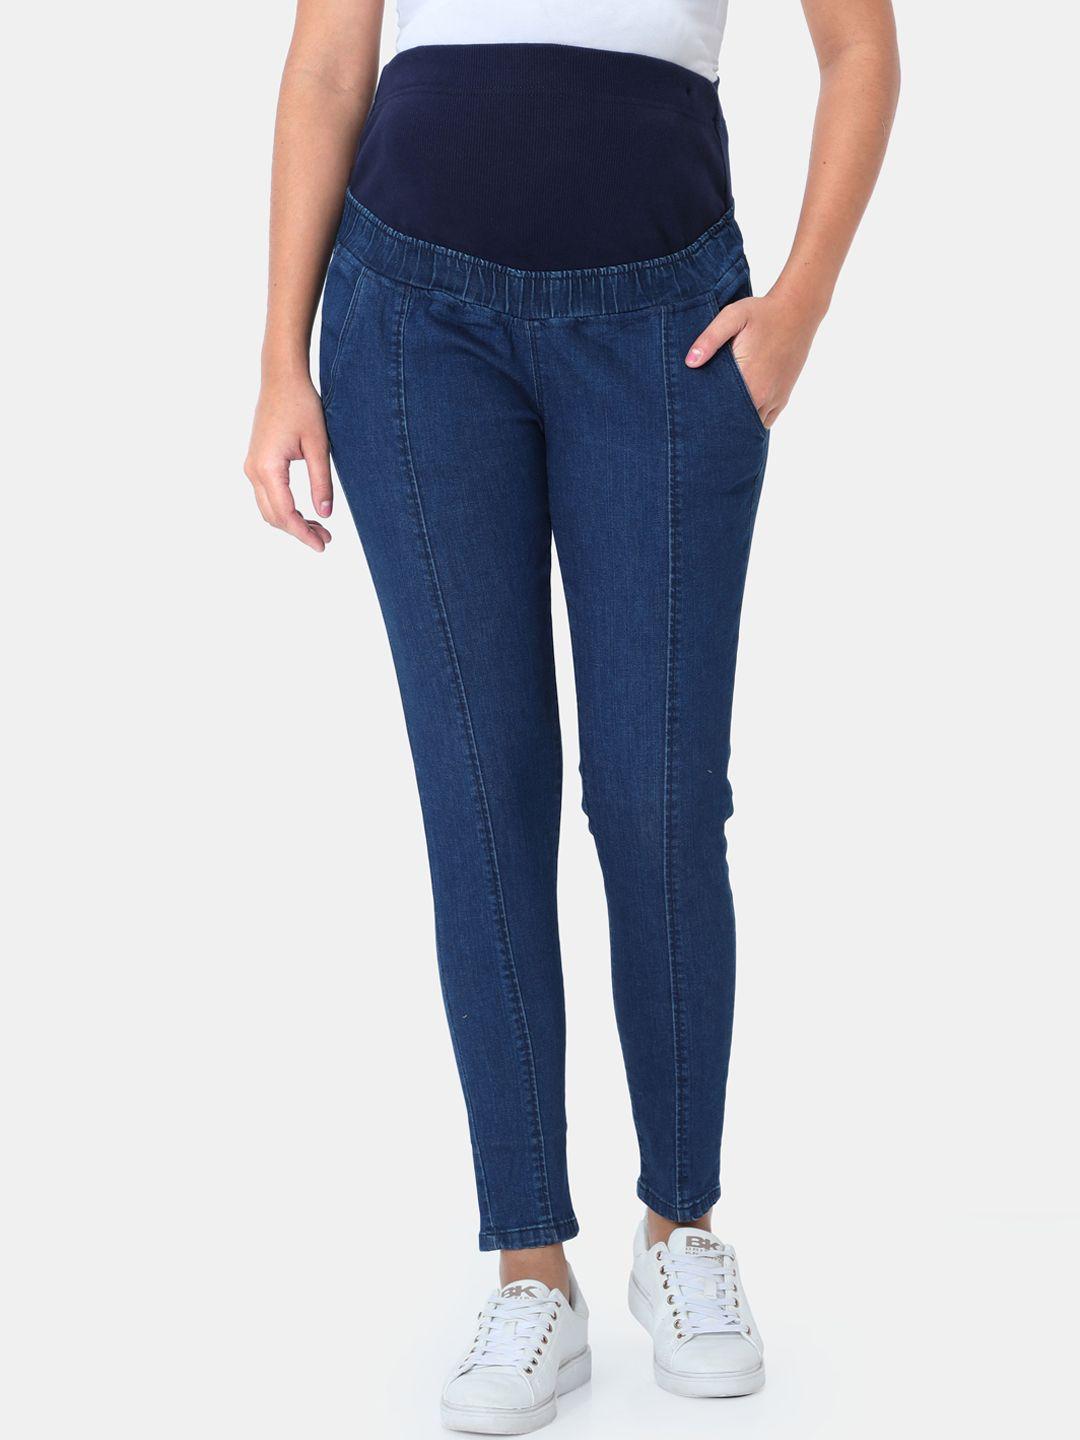 the-mom-store-women-blue-high-rise-maternity-jeans